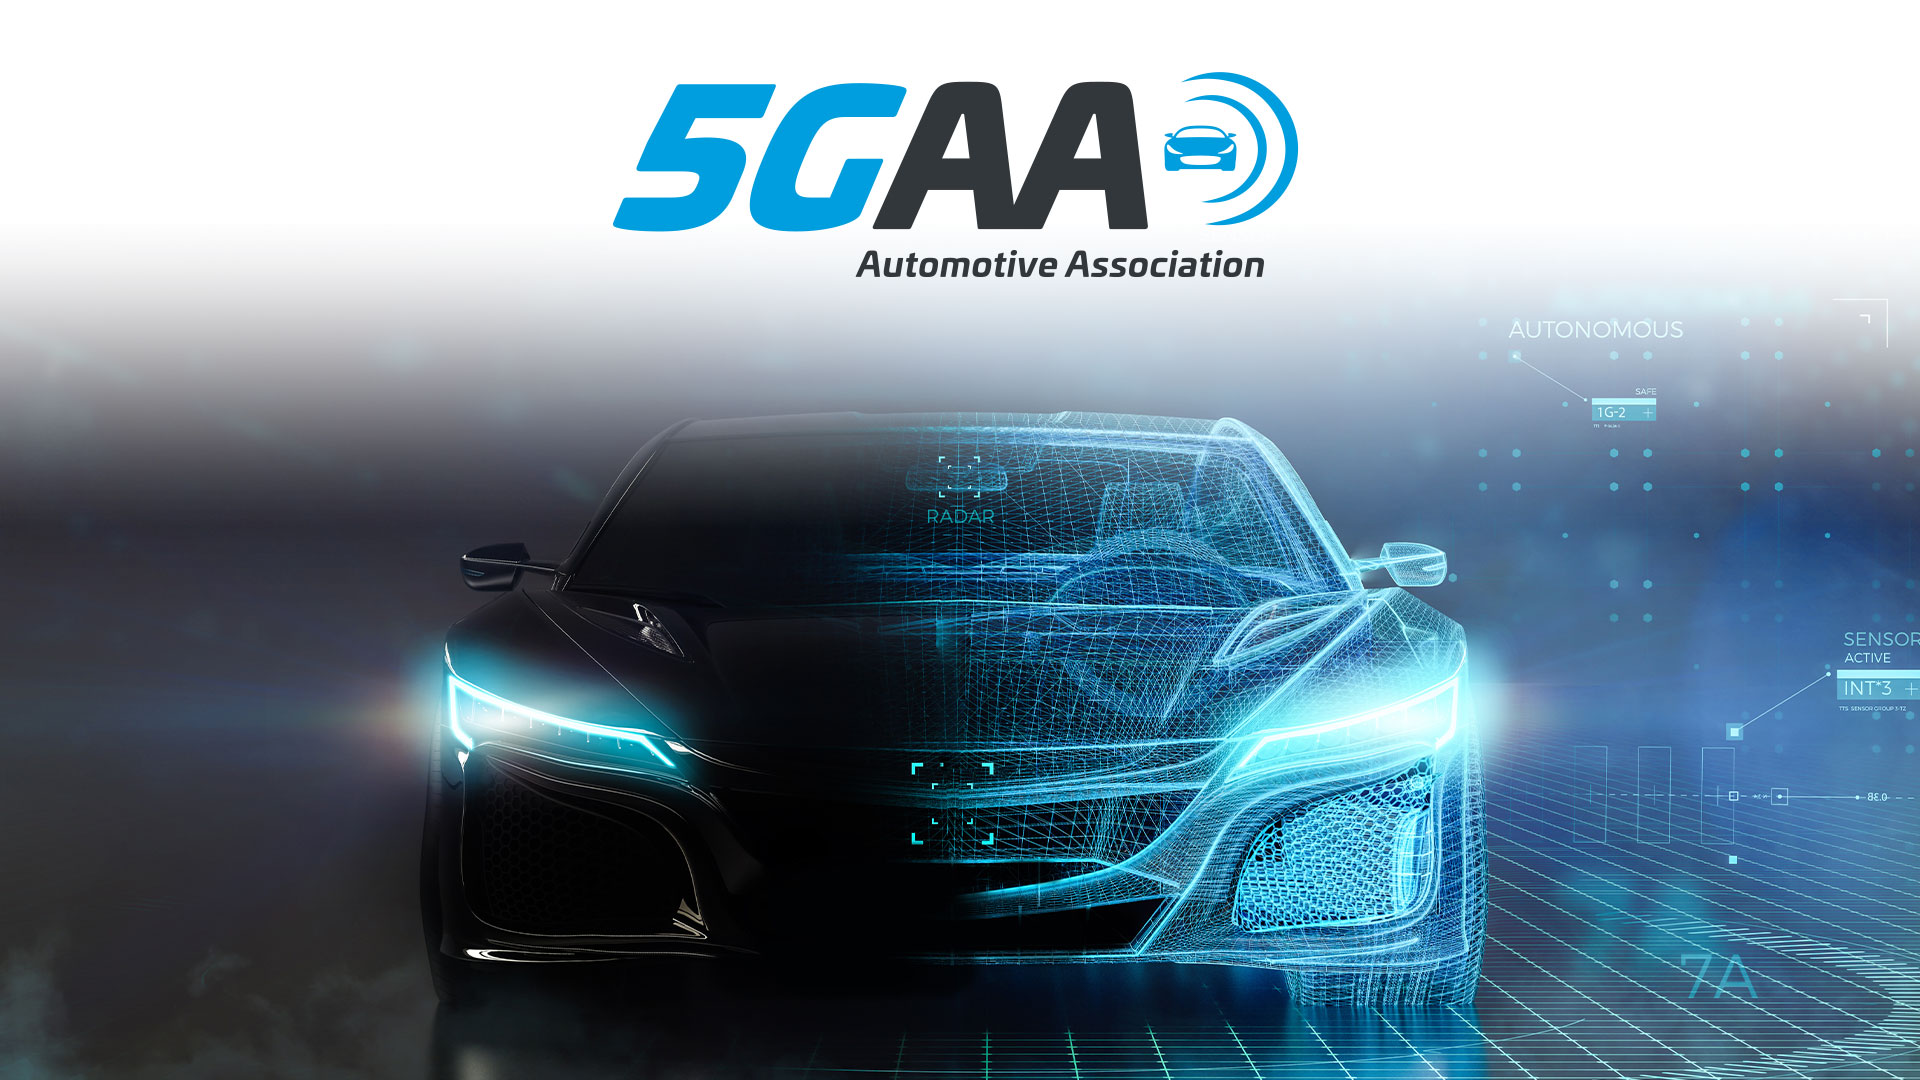 Syntony has been appointed as a member of the 5G Automotive Association